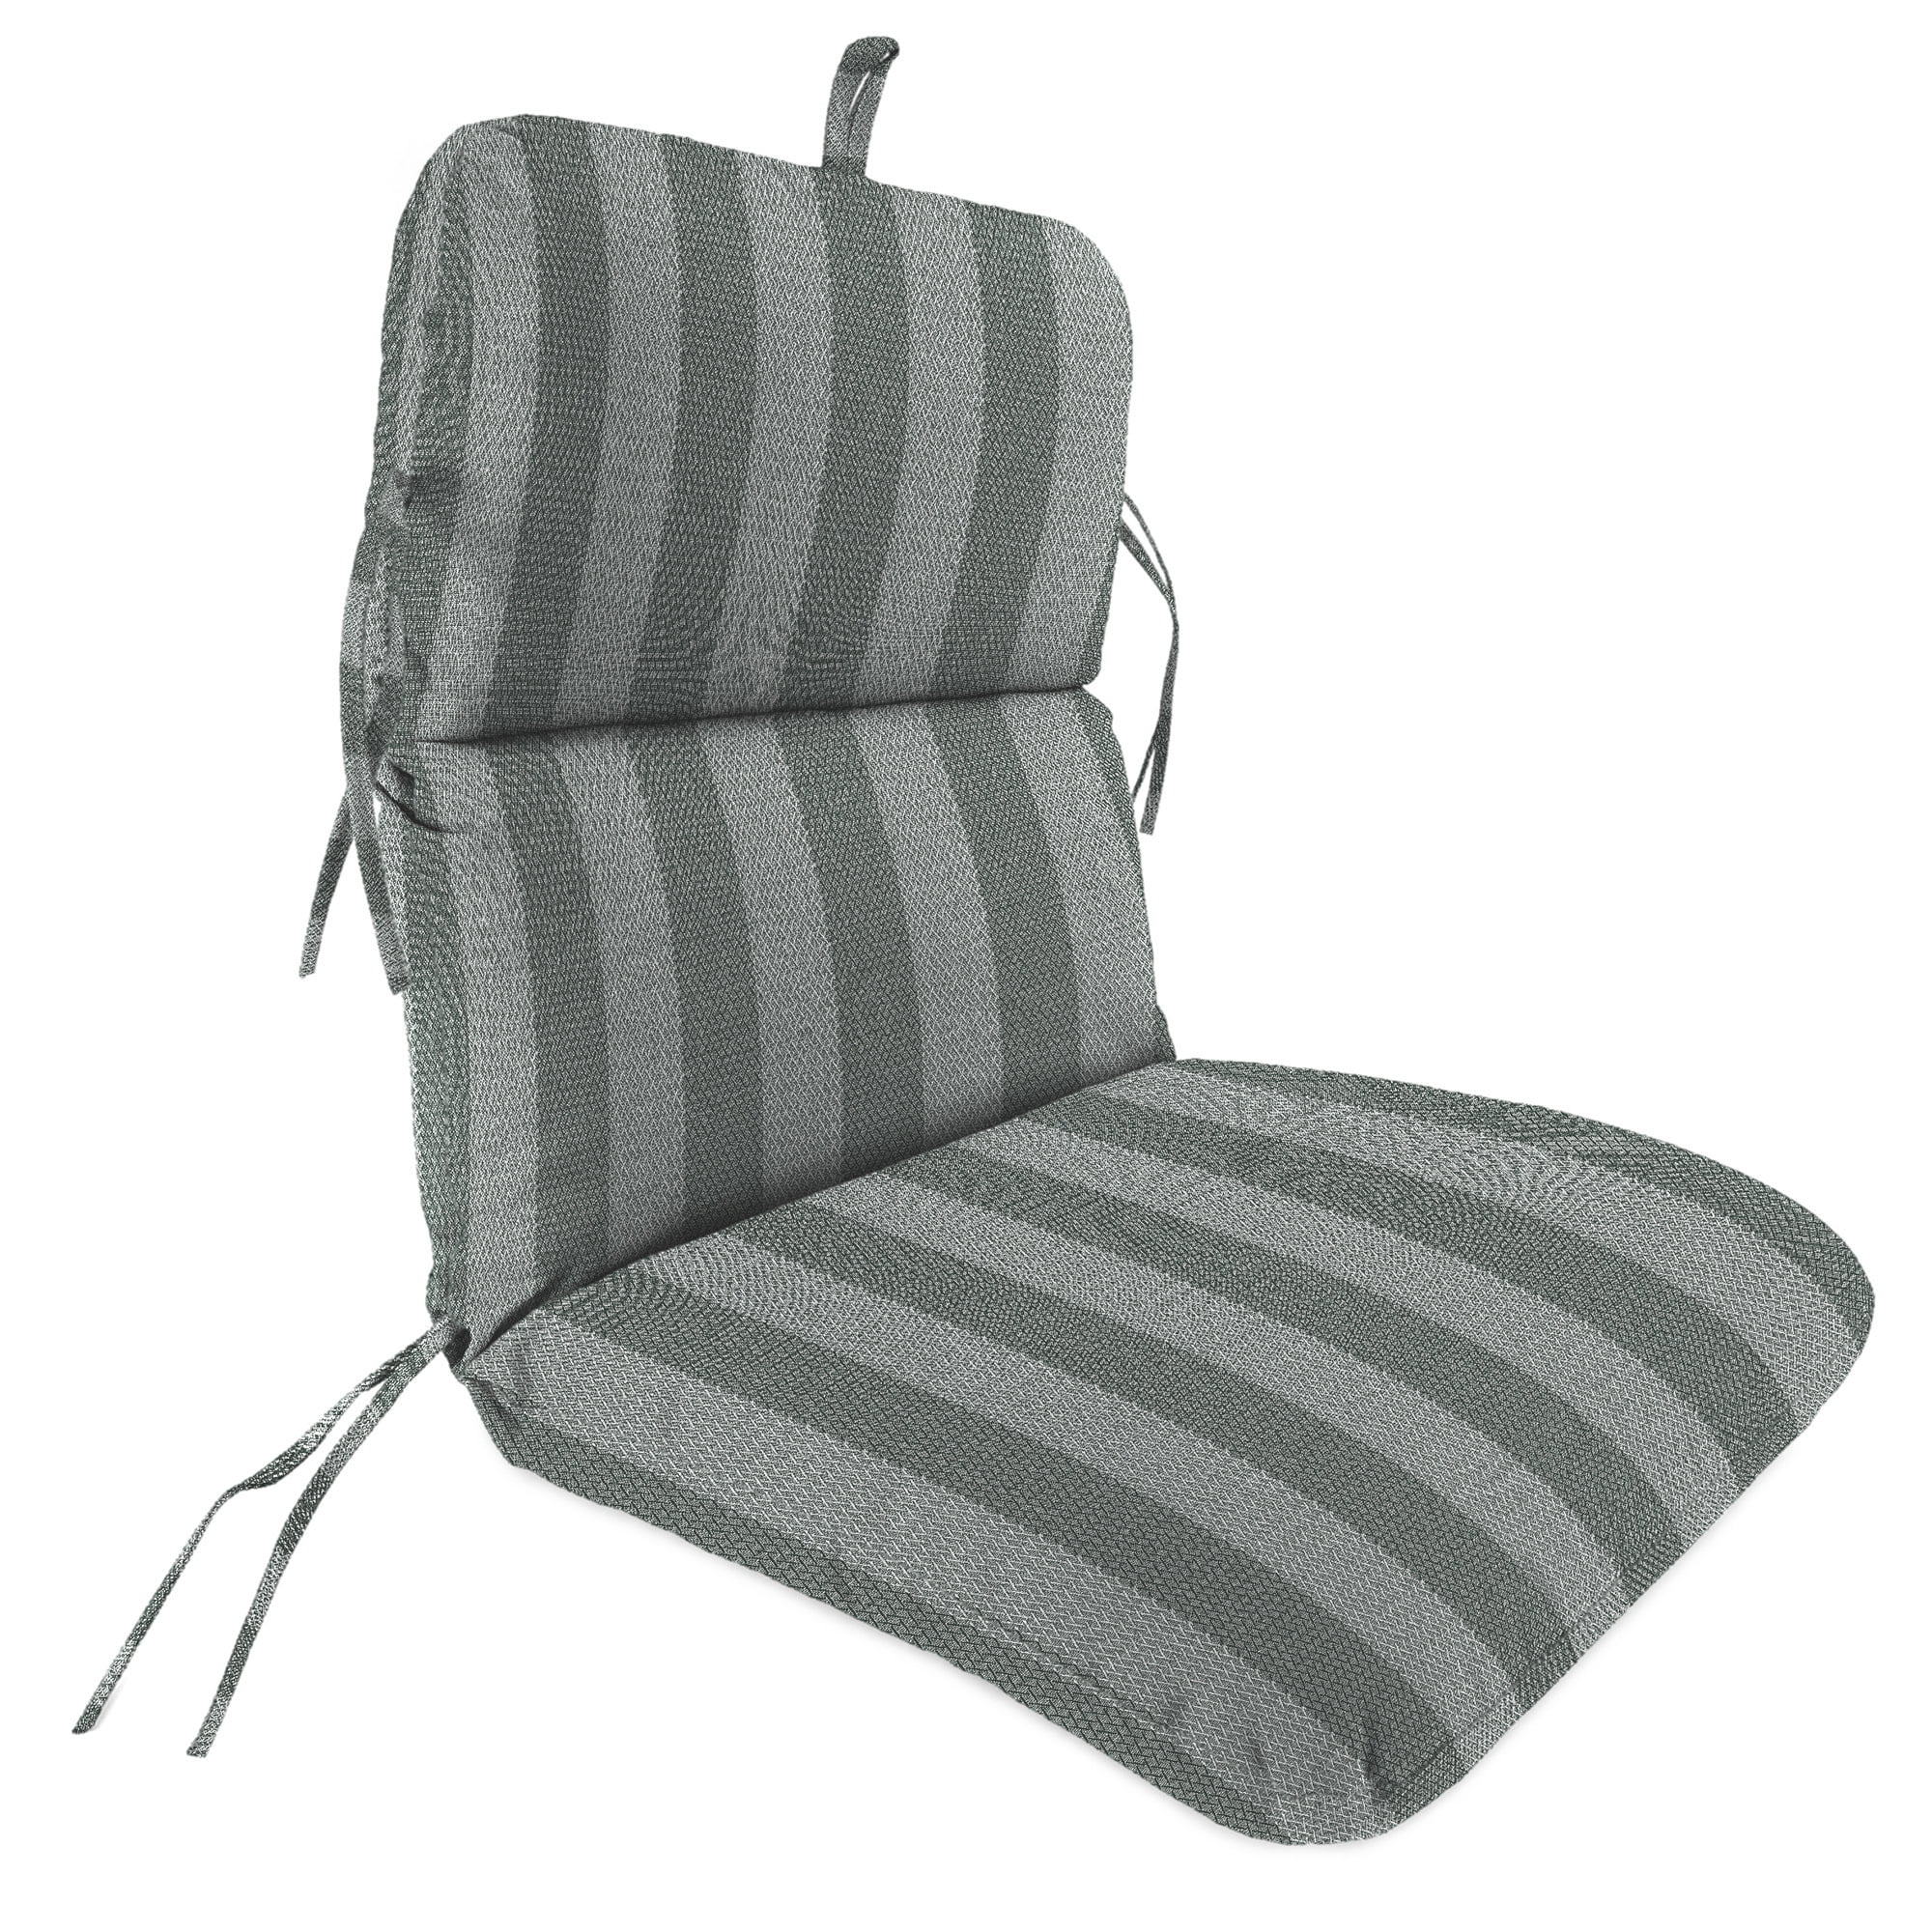 Better Homes & Gardens 42 x 24 Solid Grey Outdoor Deep Seat Cushion Set with Enviroguard - Each